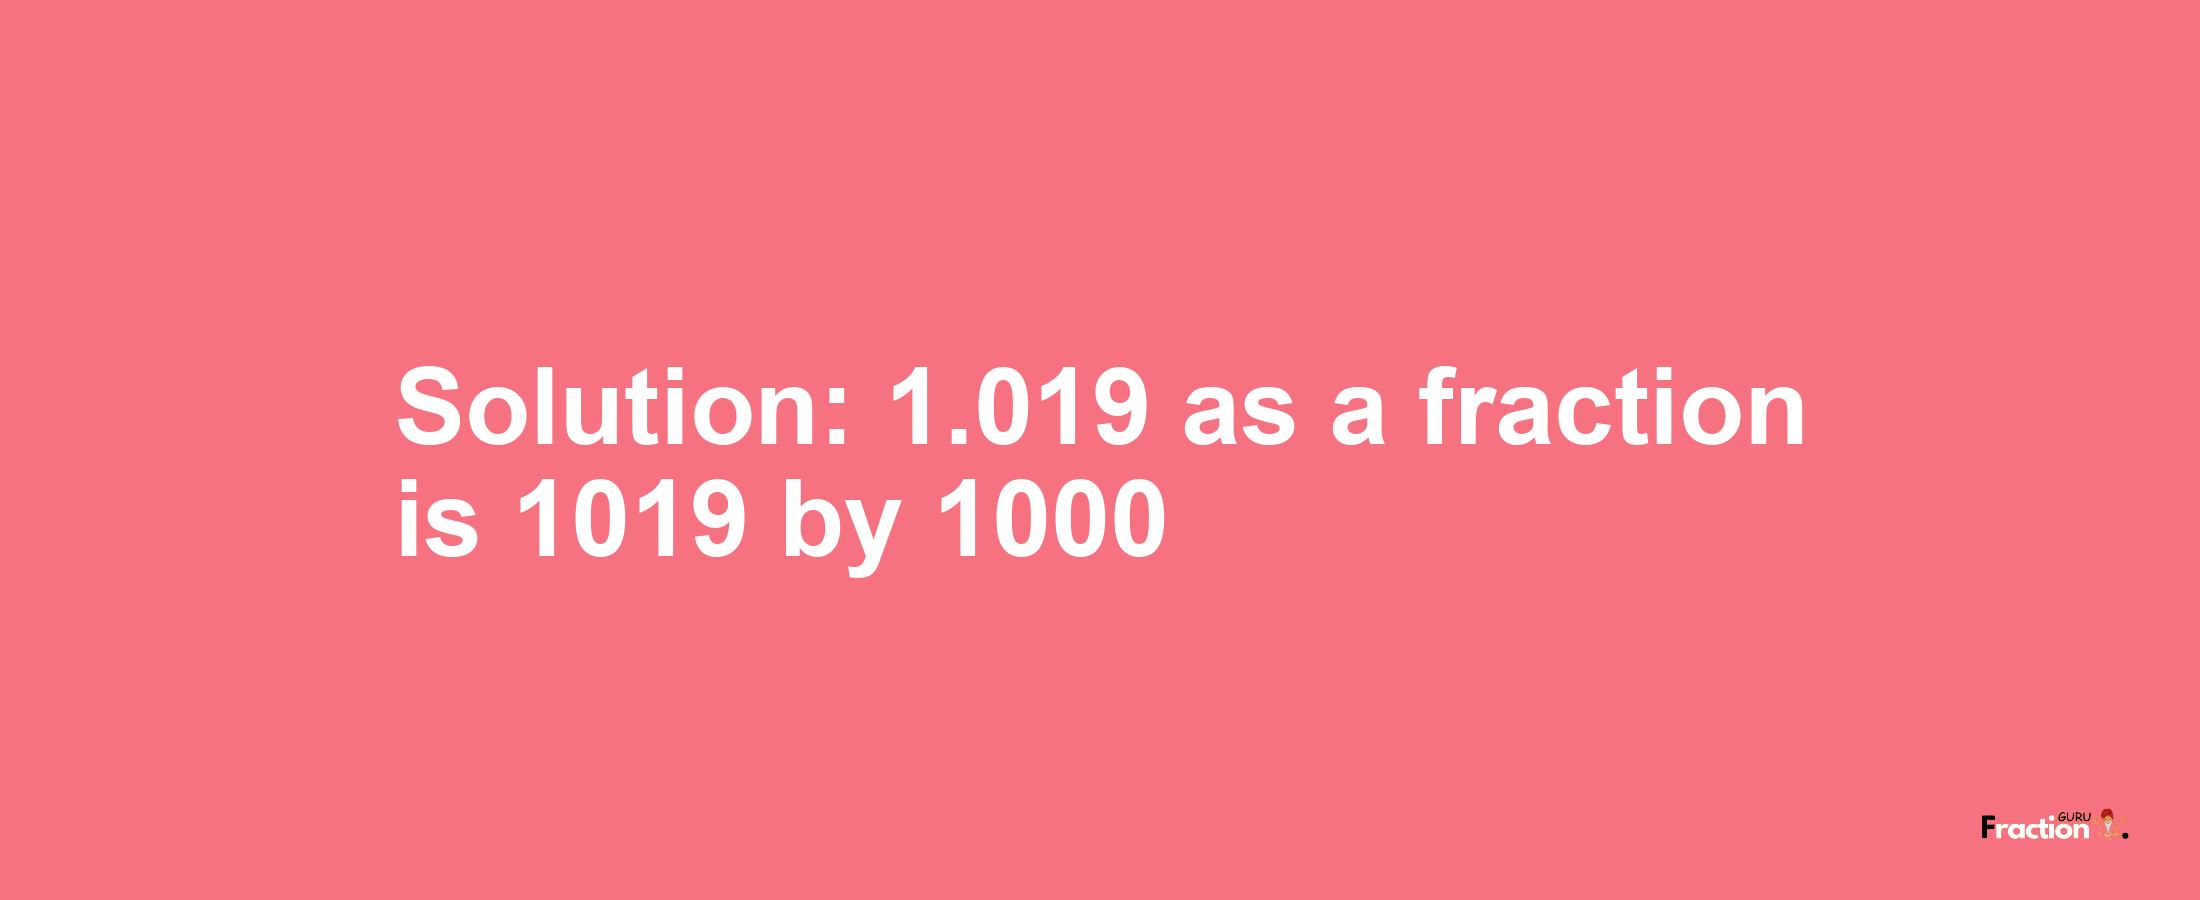 Solution:1.019 as a fraction is 1019/1000